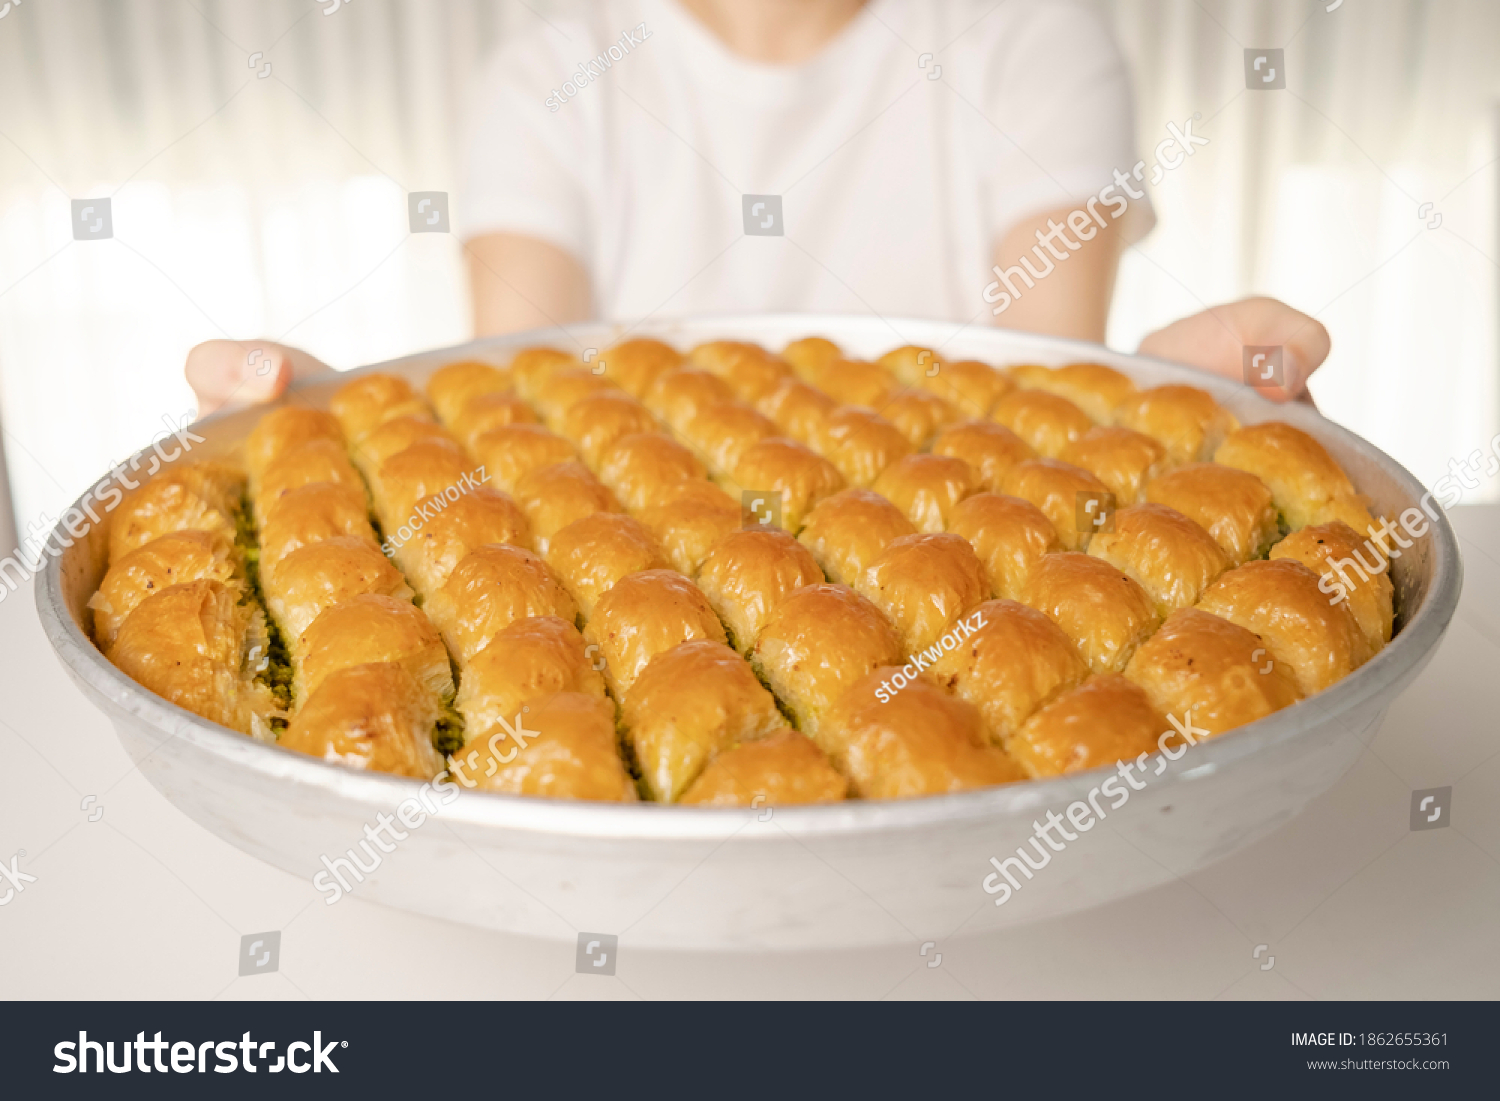 Close detail shot of a tray of crispy baklava dessert in the background white t-shirt woman holding the tray in her hand #1862655361